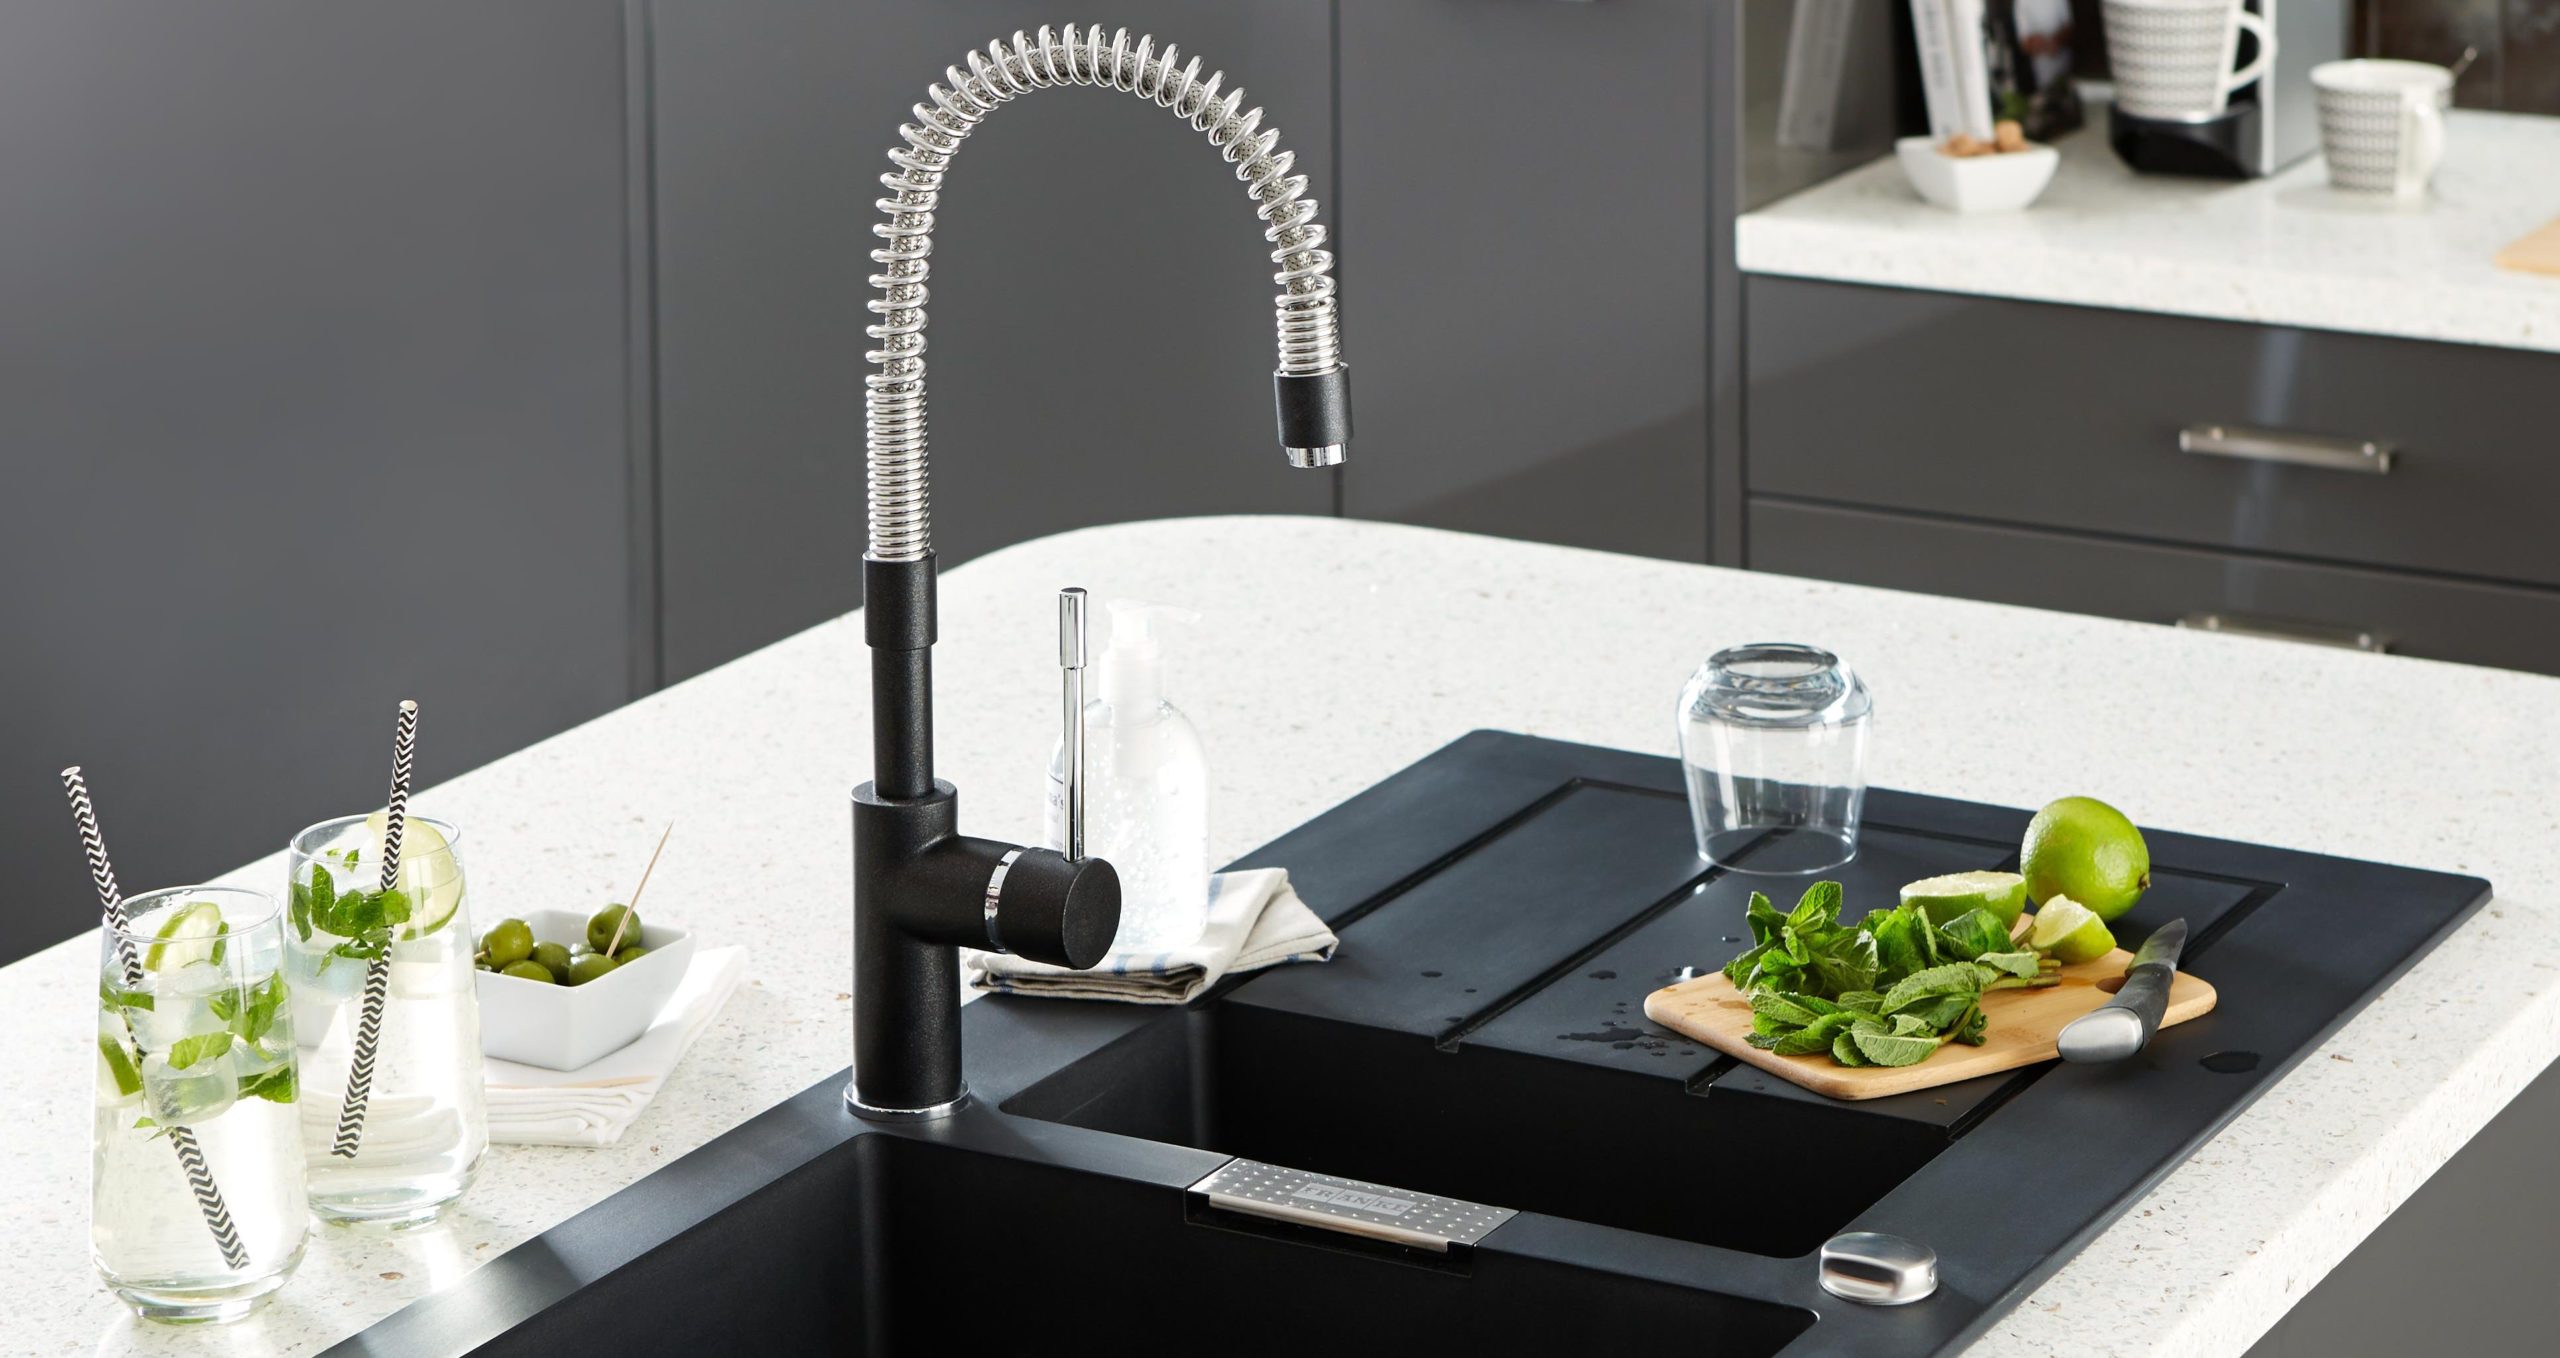 Boiling Water Taps Offer Many Advantages In Both Homes And Businesses